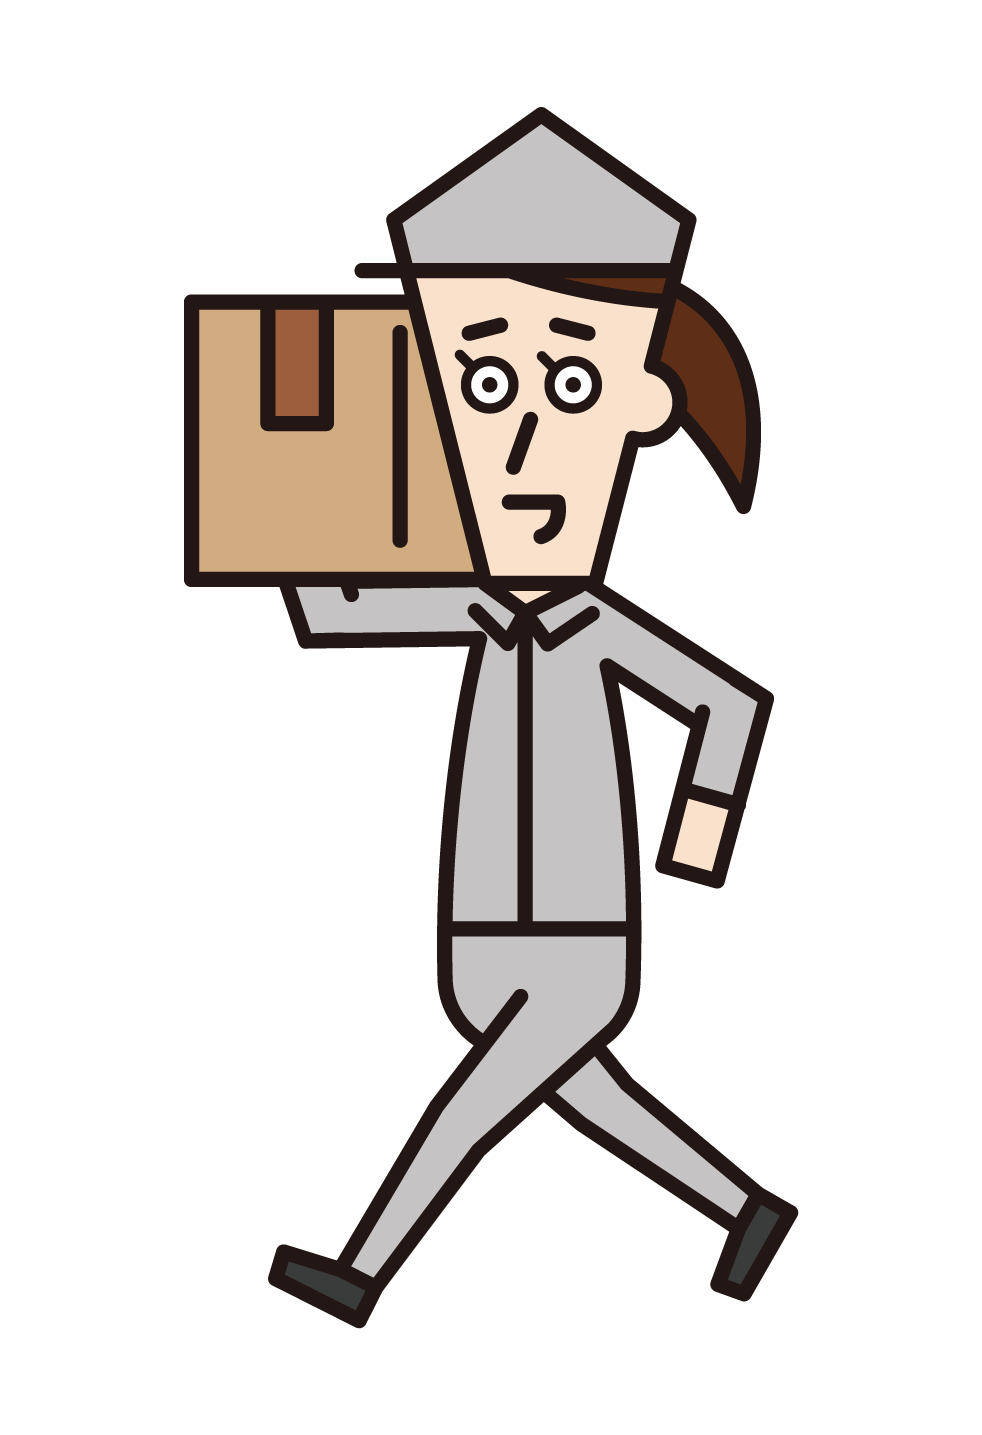 Illustration of a person (male) carrying luggage lightly